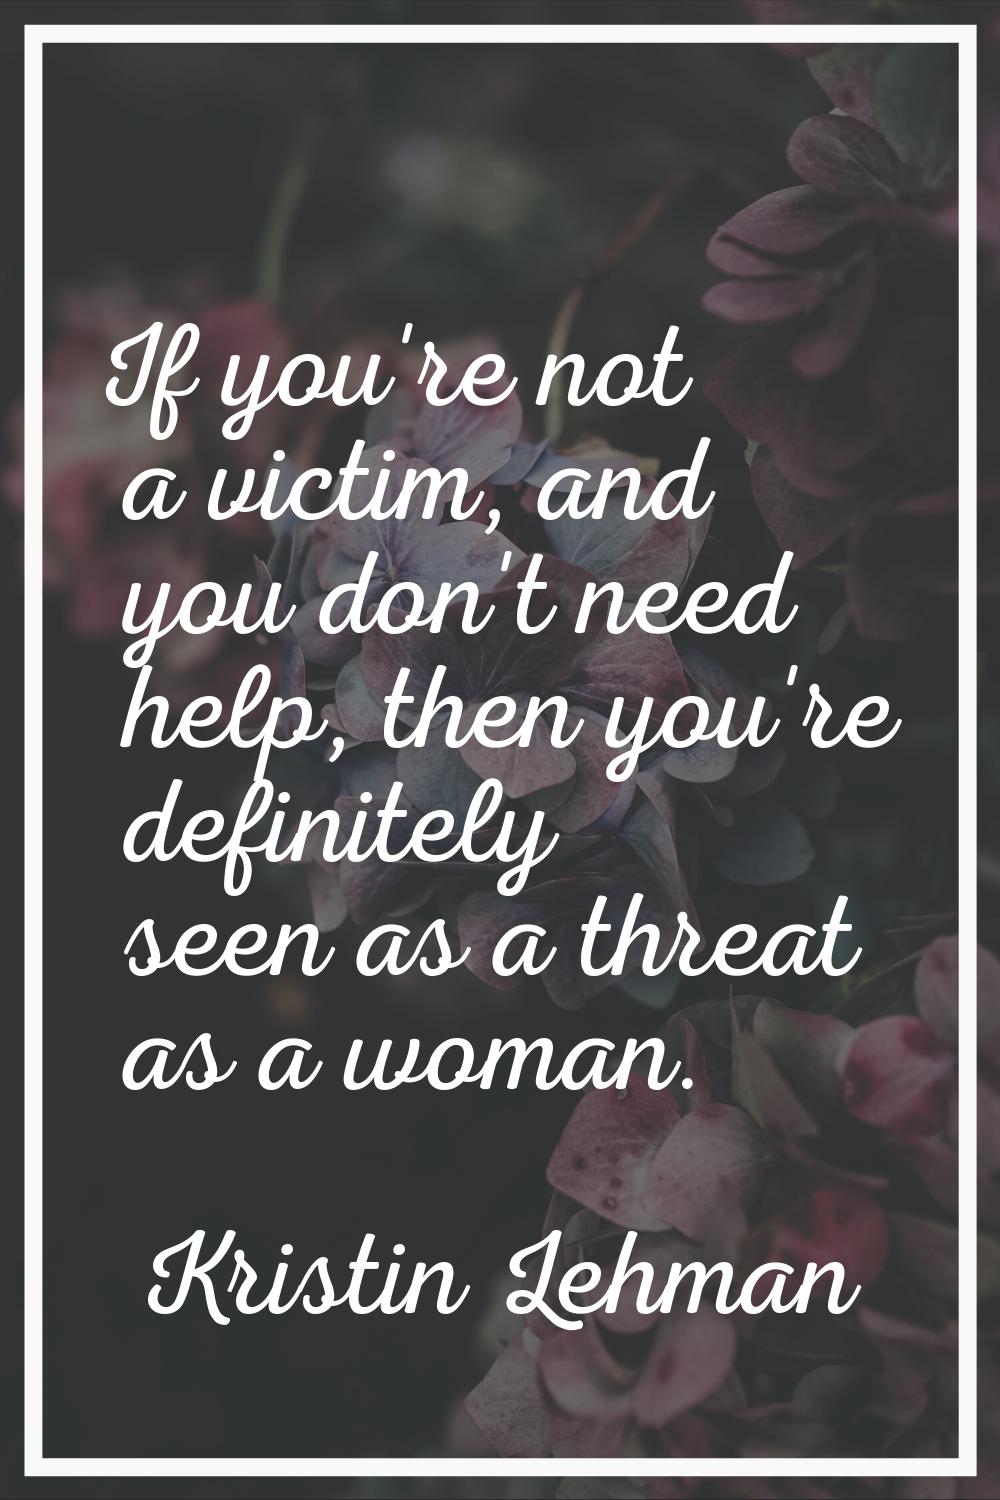 If you're not a victim, and you don't need help, then you're definitely seen as a threat as a woman